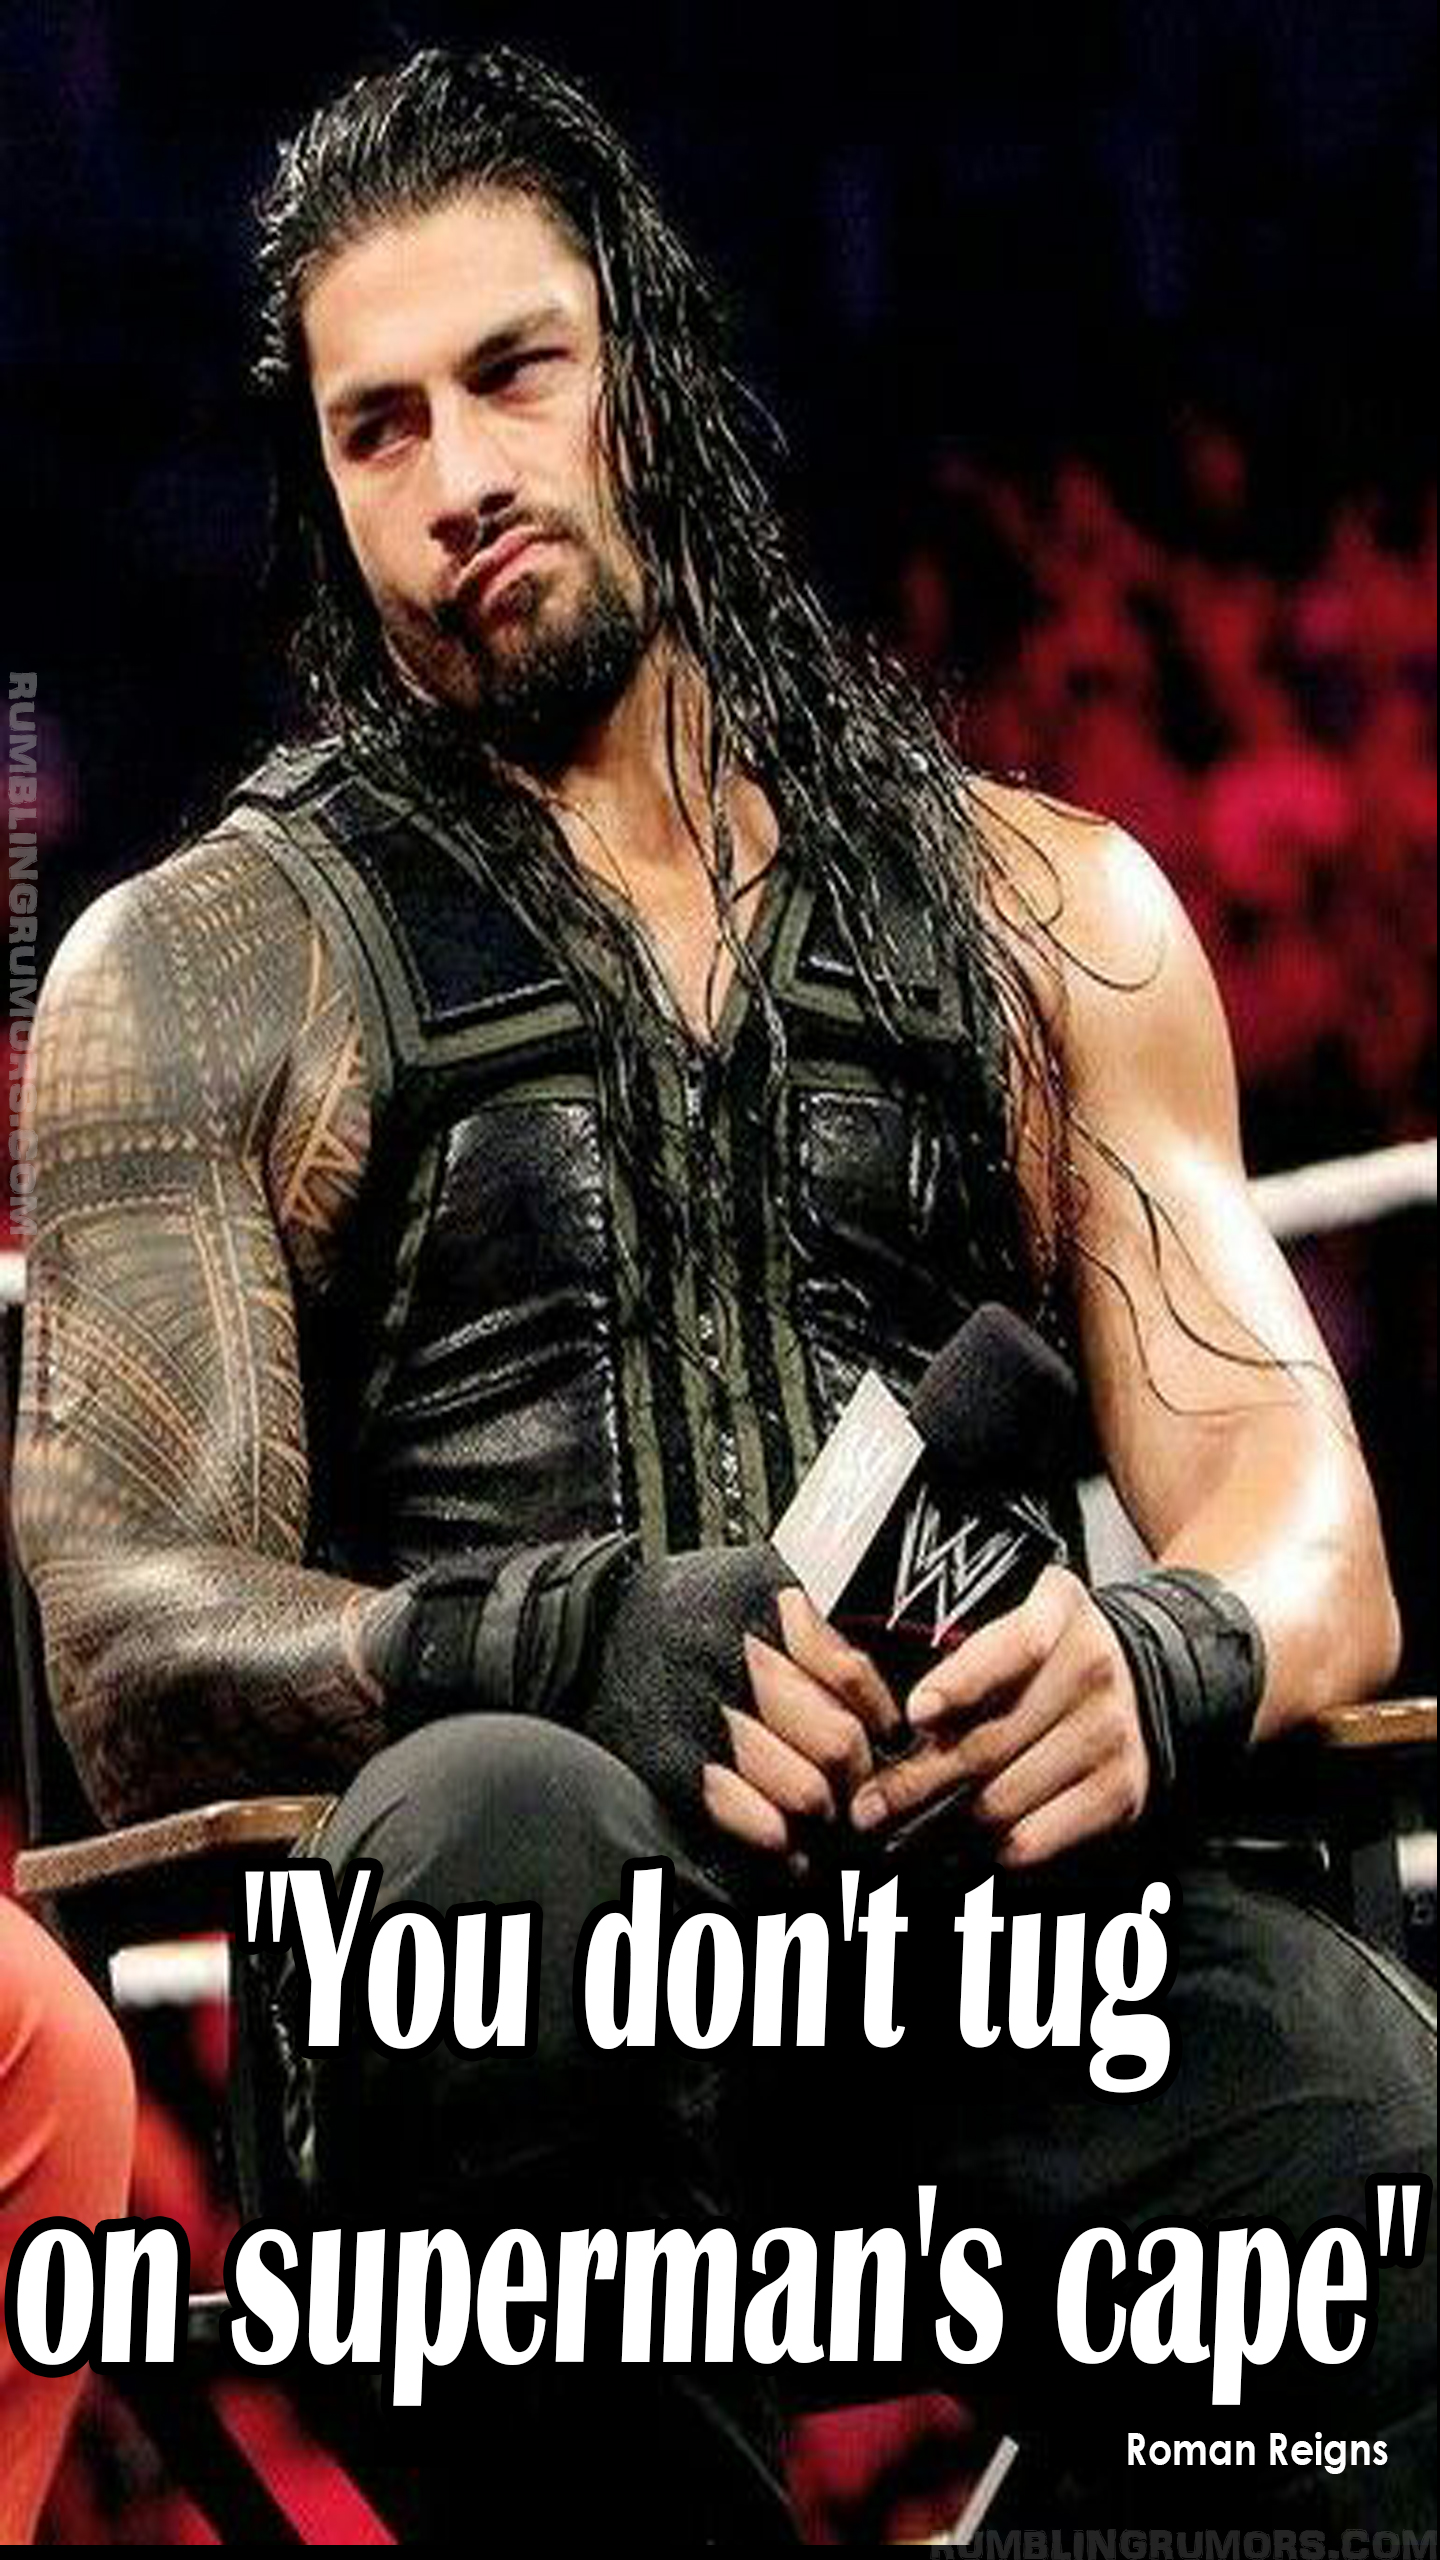 Roman Reigns Pic With Quotes - HD Wallpaper 